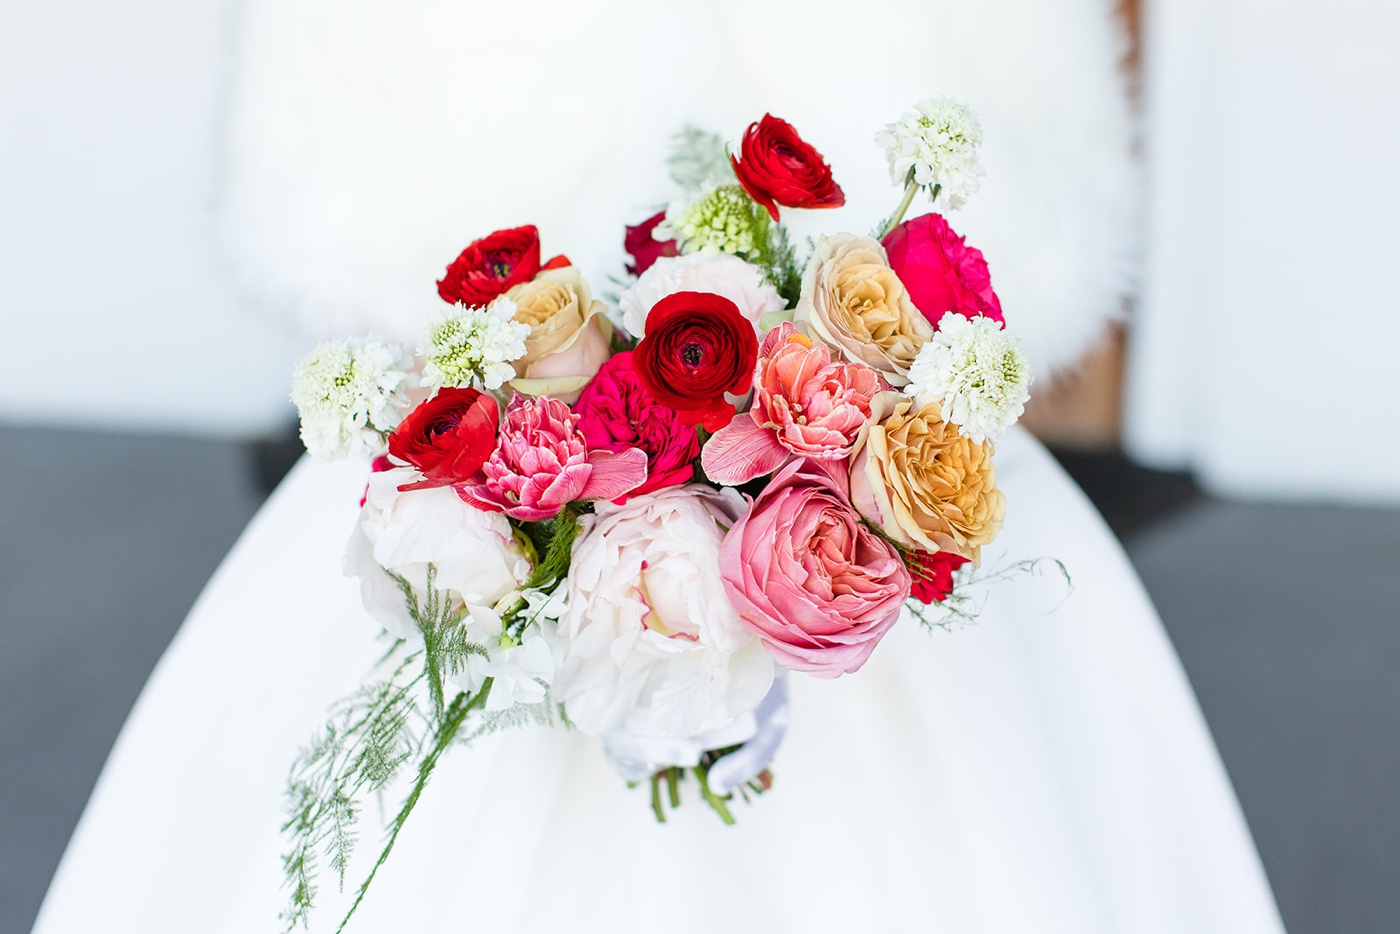 Bride holding a bouquet filled with roses, ranunculus, white pincushion, fresh ferns, and peonies